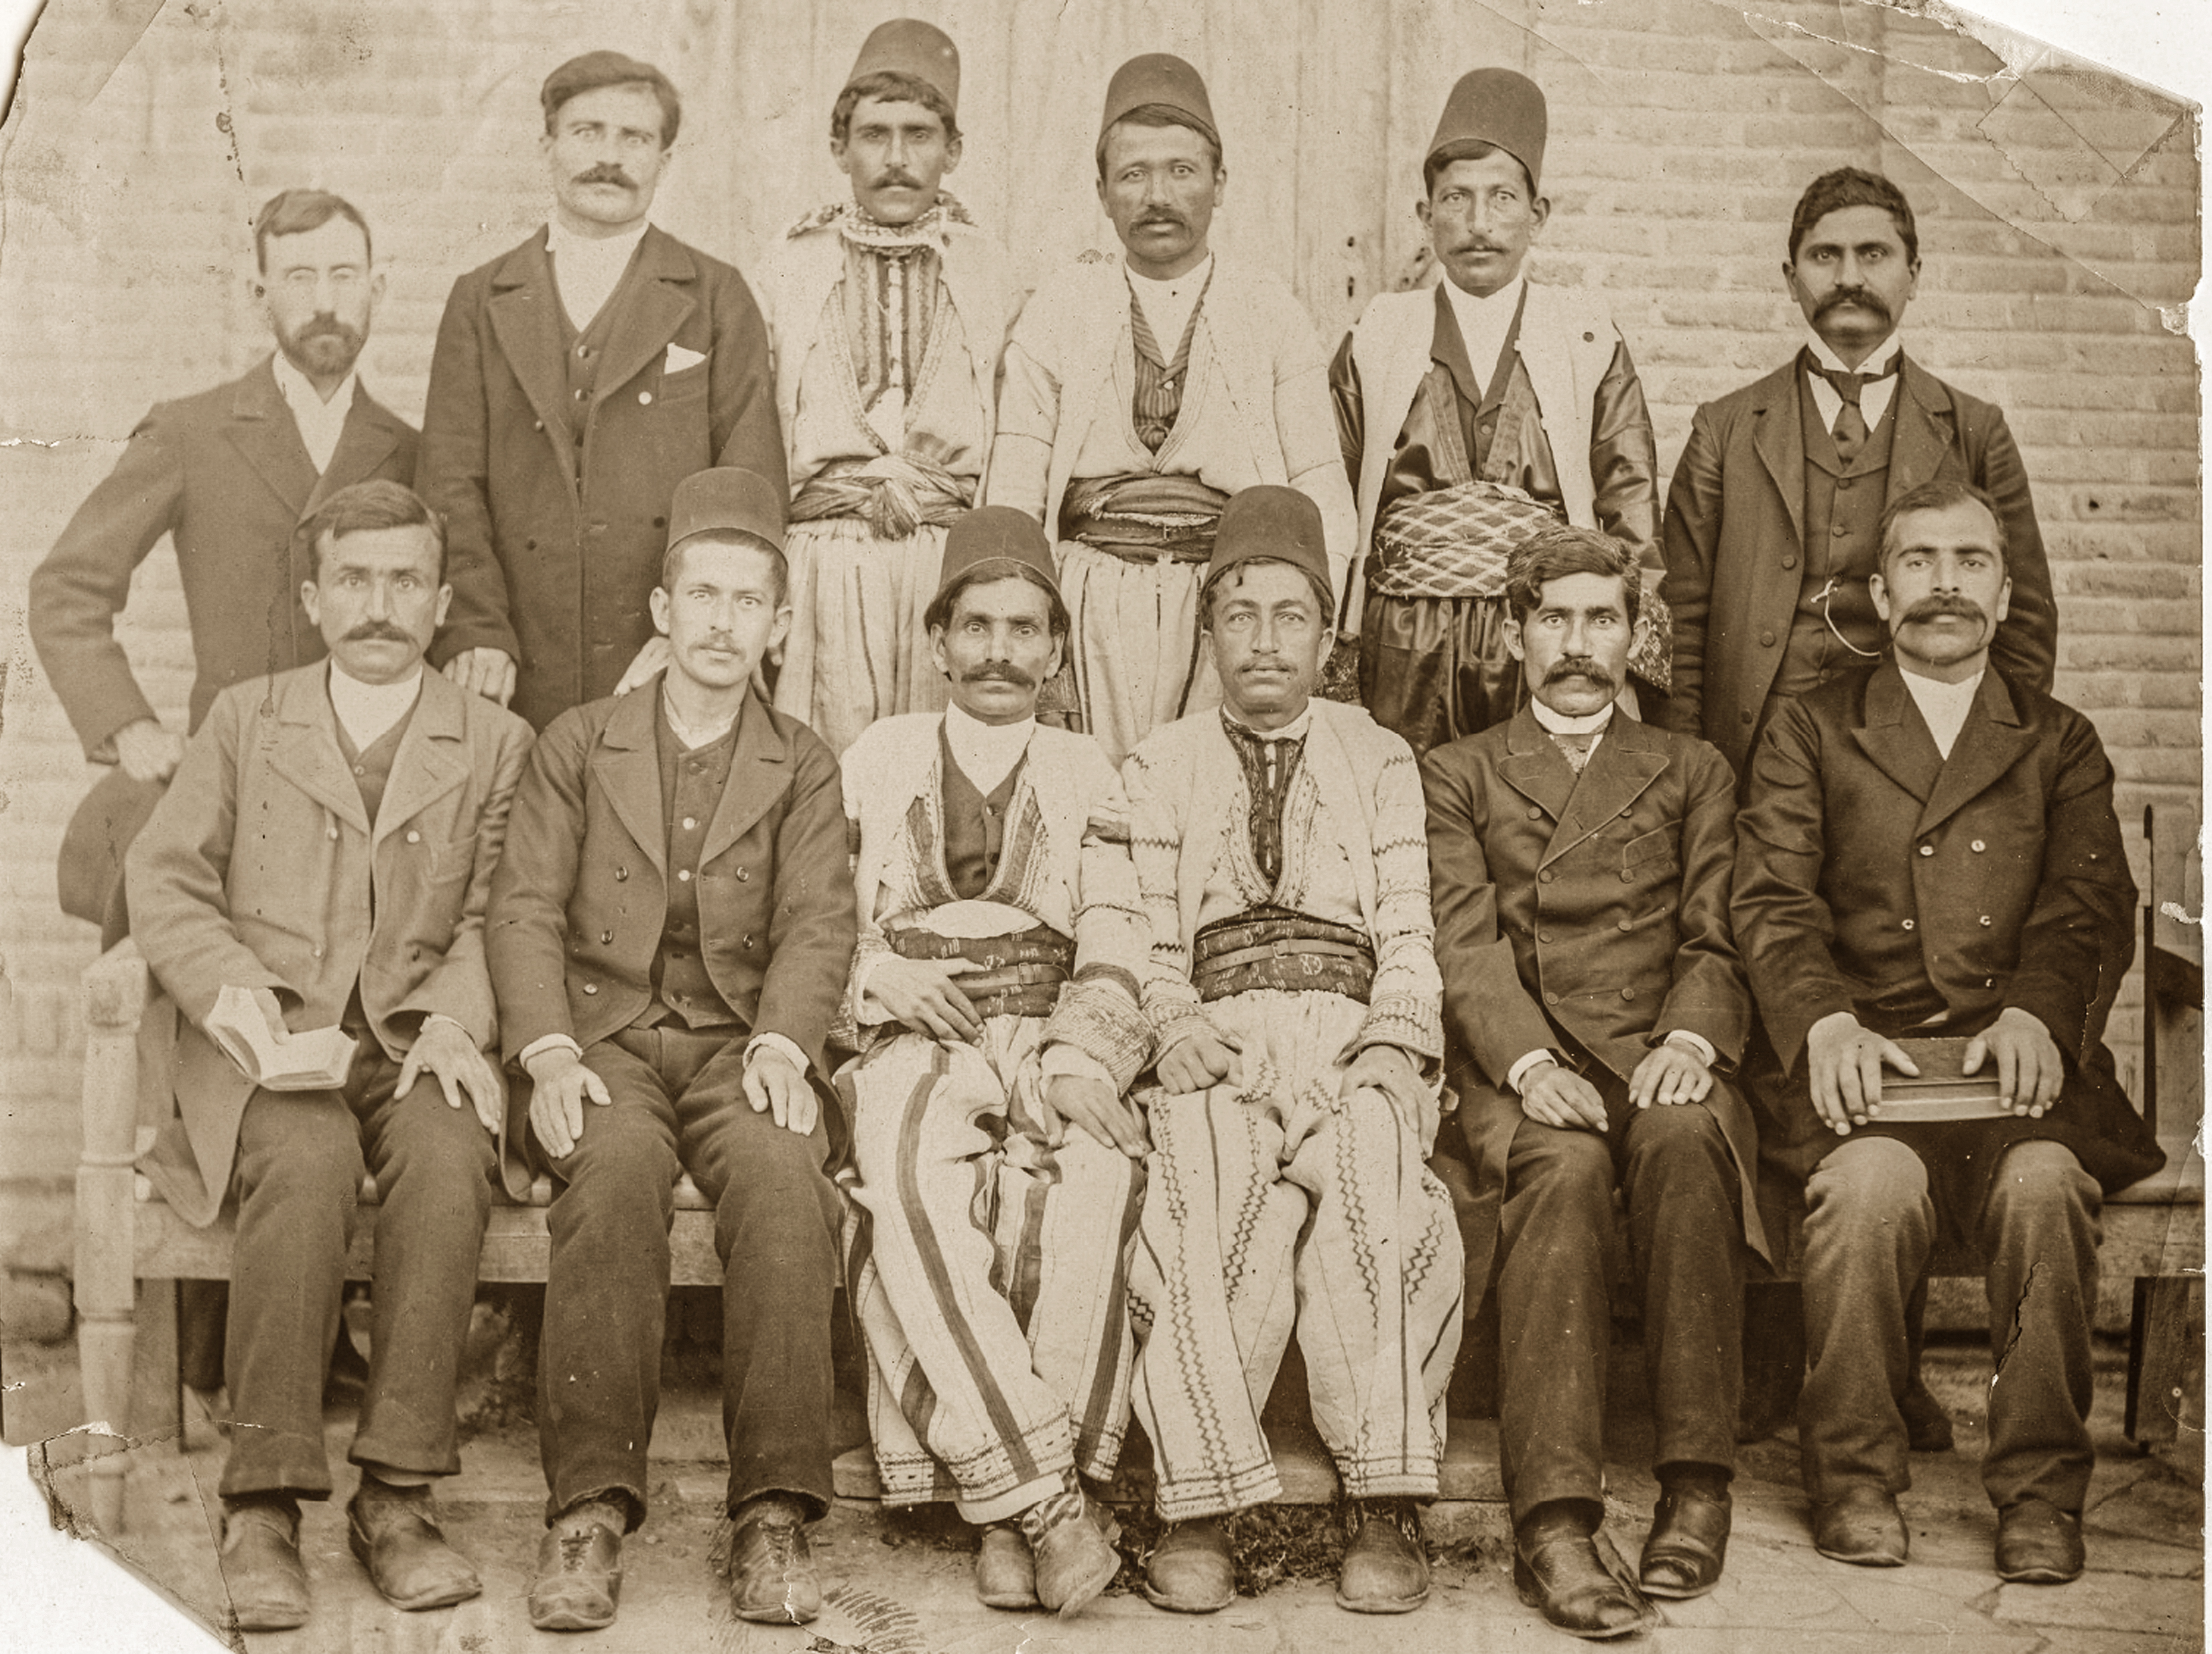 A sepiatone photo depicts a group of students at a theological school in Iran.